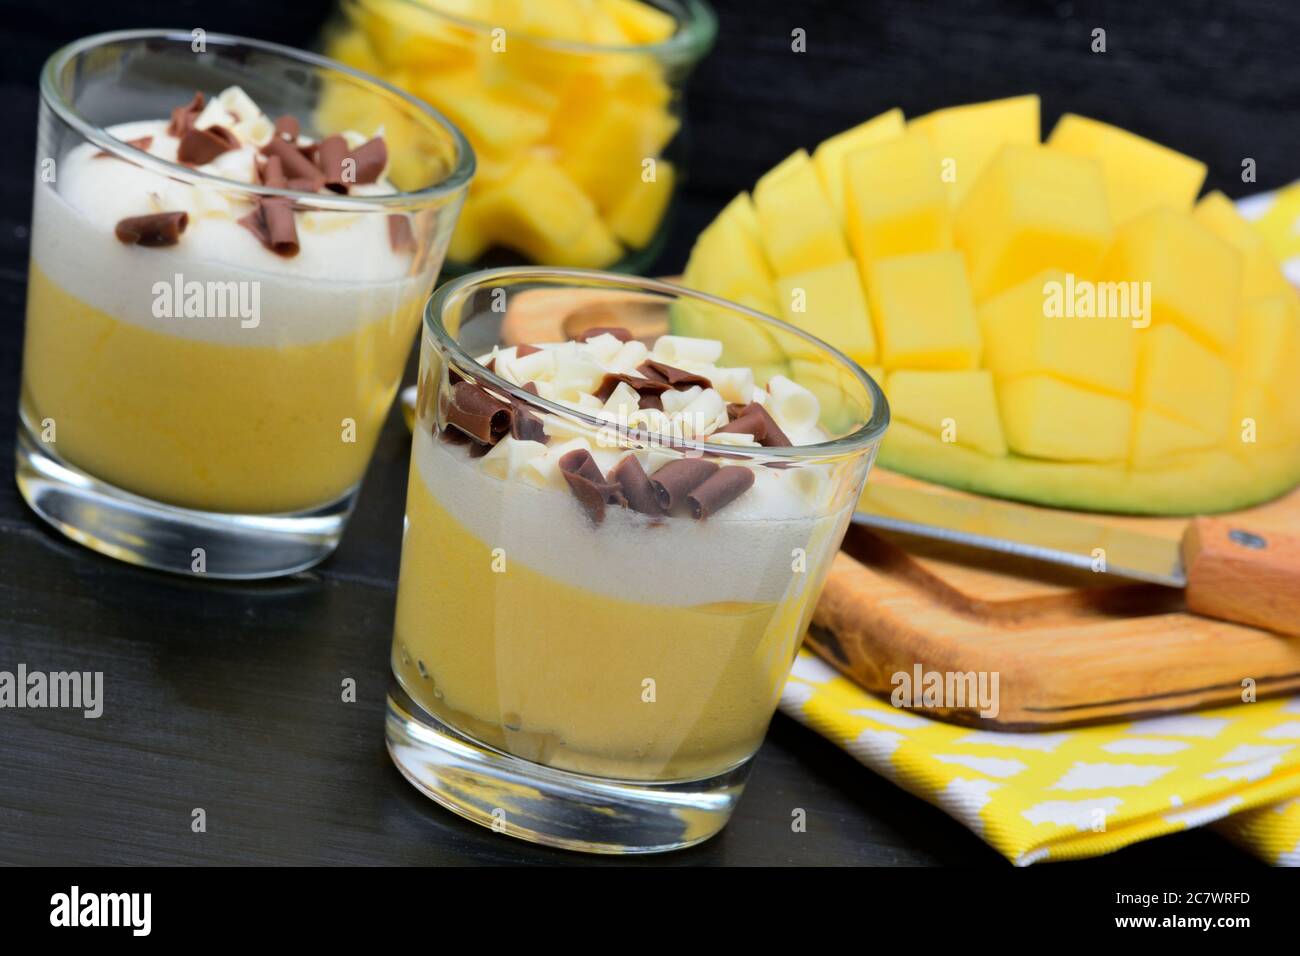 Pudding of mango in a glasses jars on a black wooden table Stock Photo